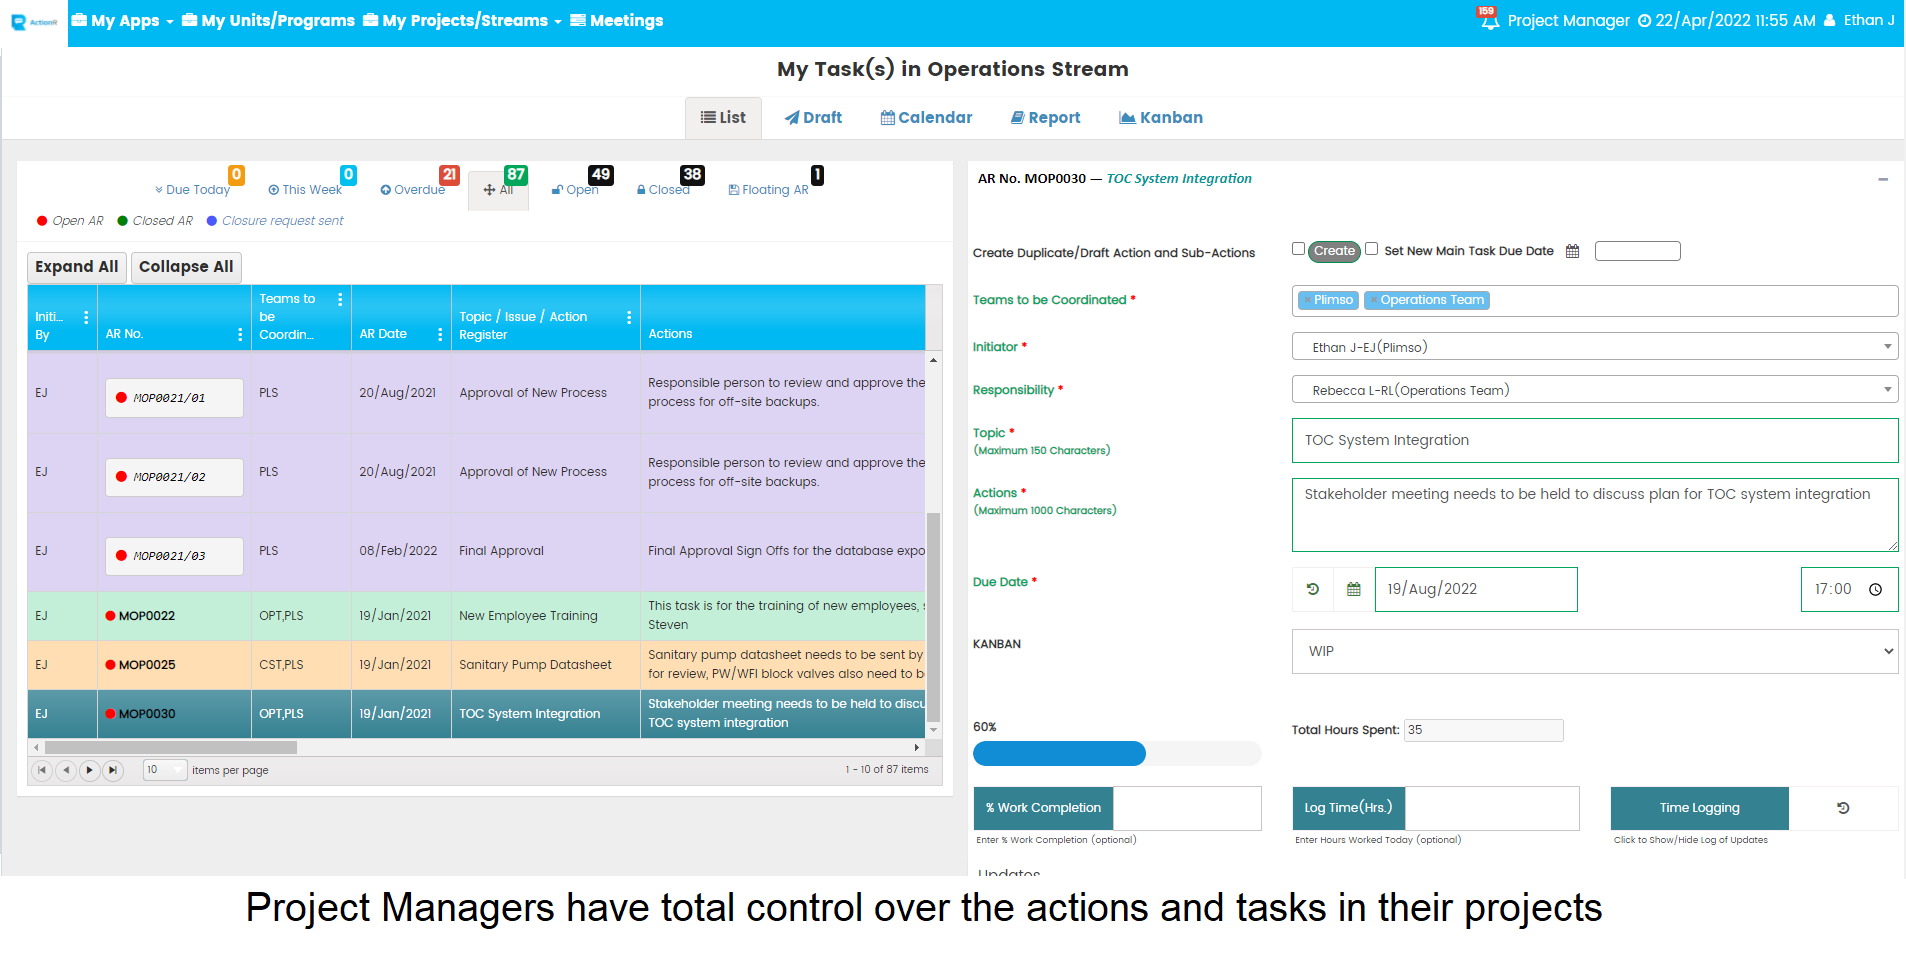 ActionR Software - Open Action - Project Manager View